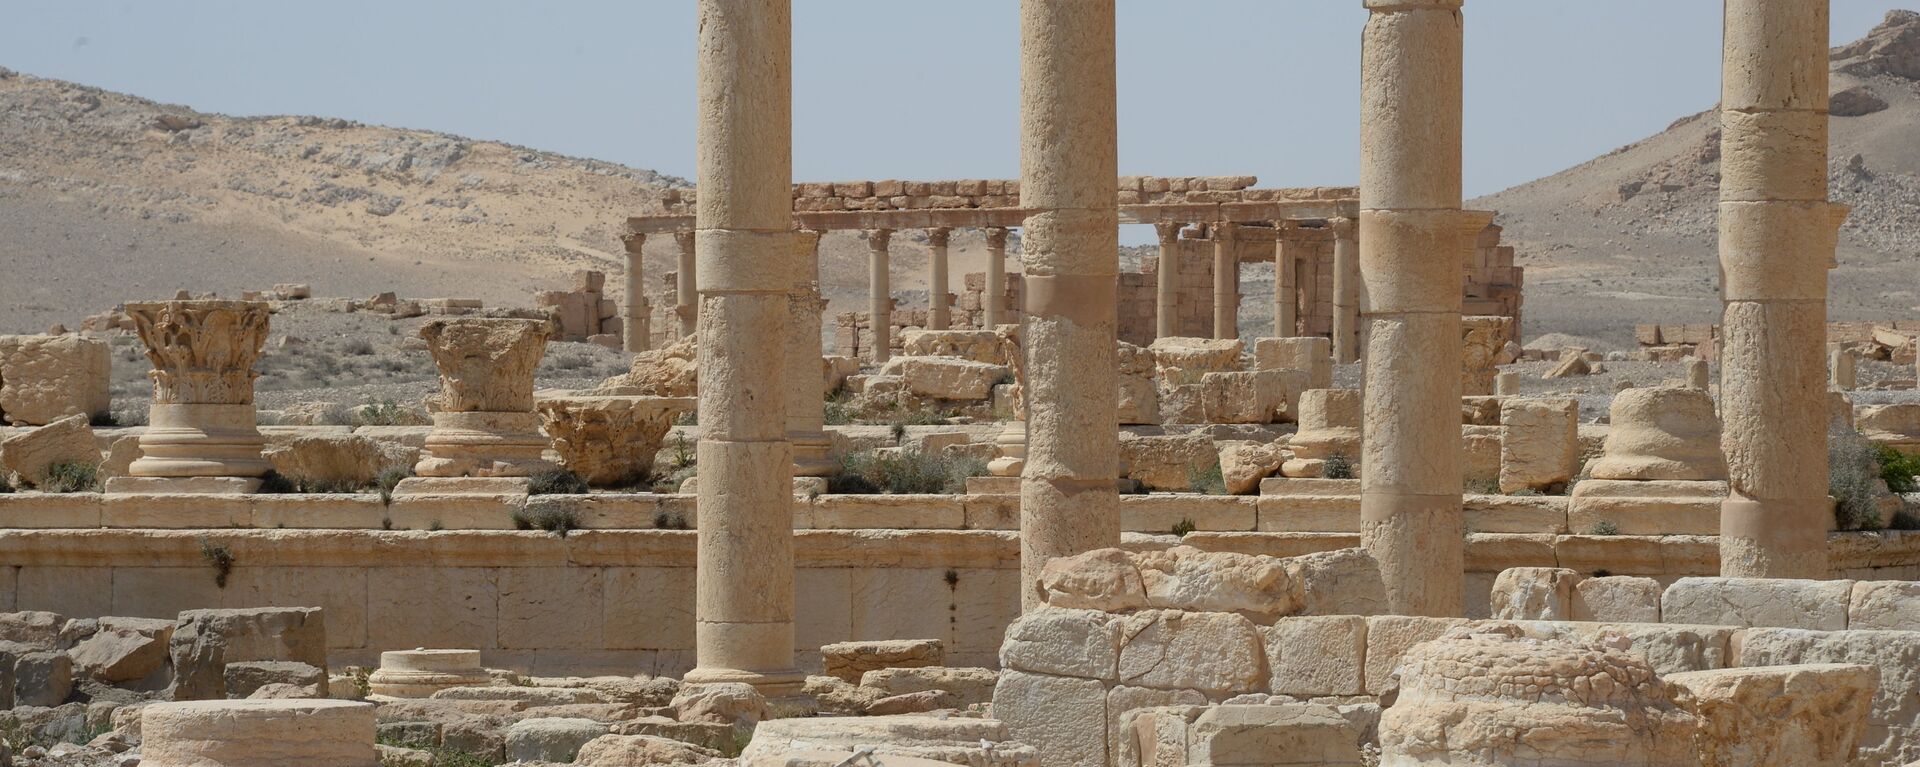 Historic site in Palmyra destroyed in military operations - Sputnik International, 1920, 05.05.2016